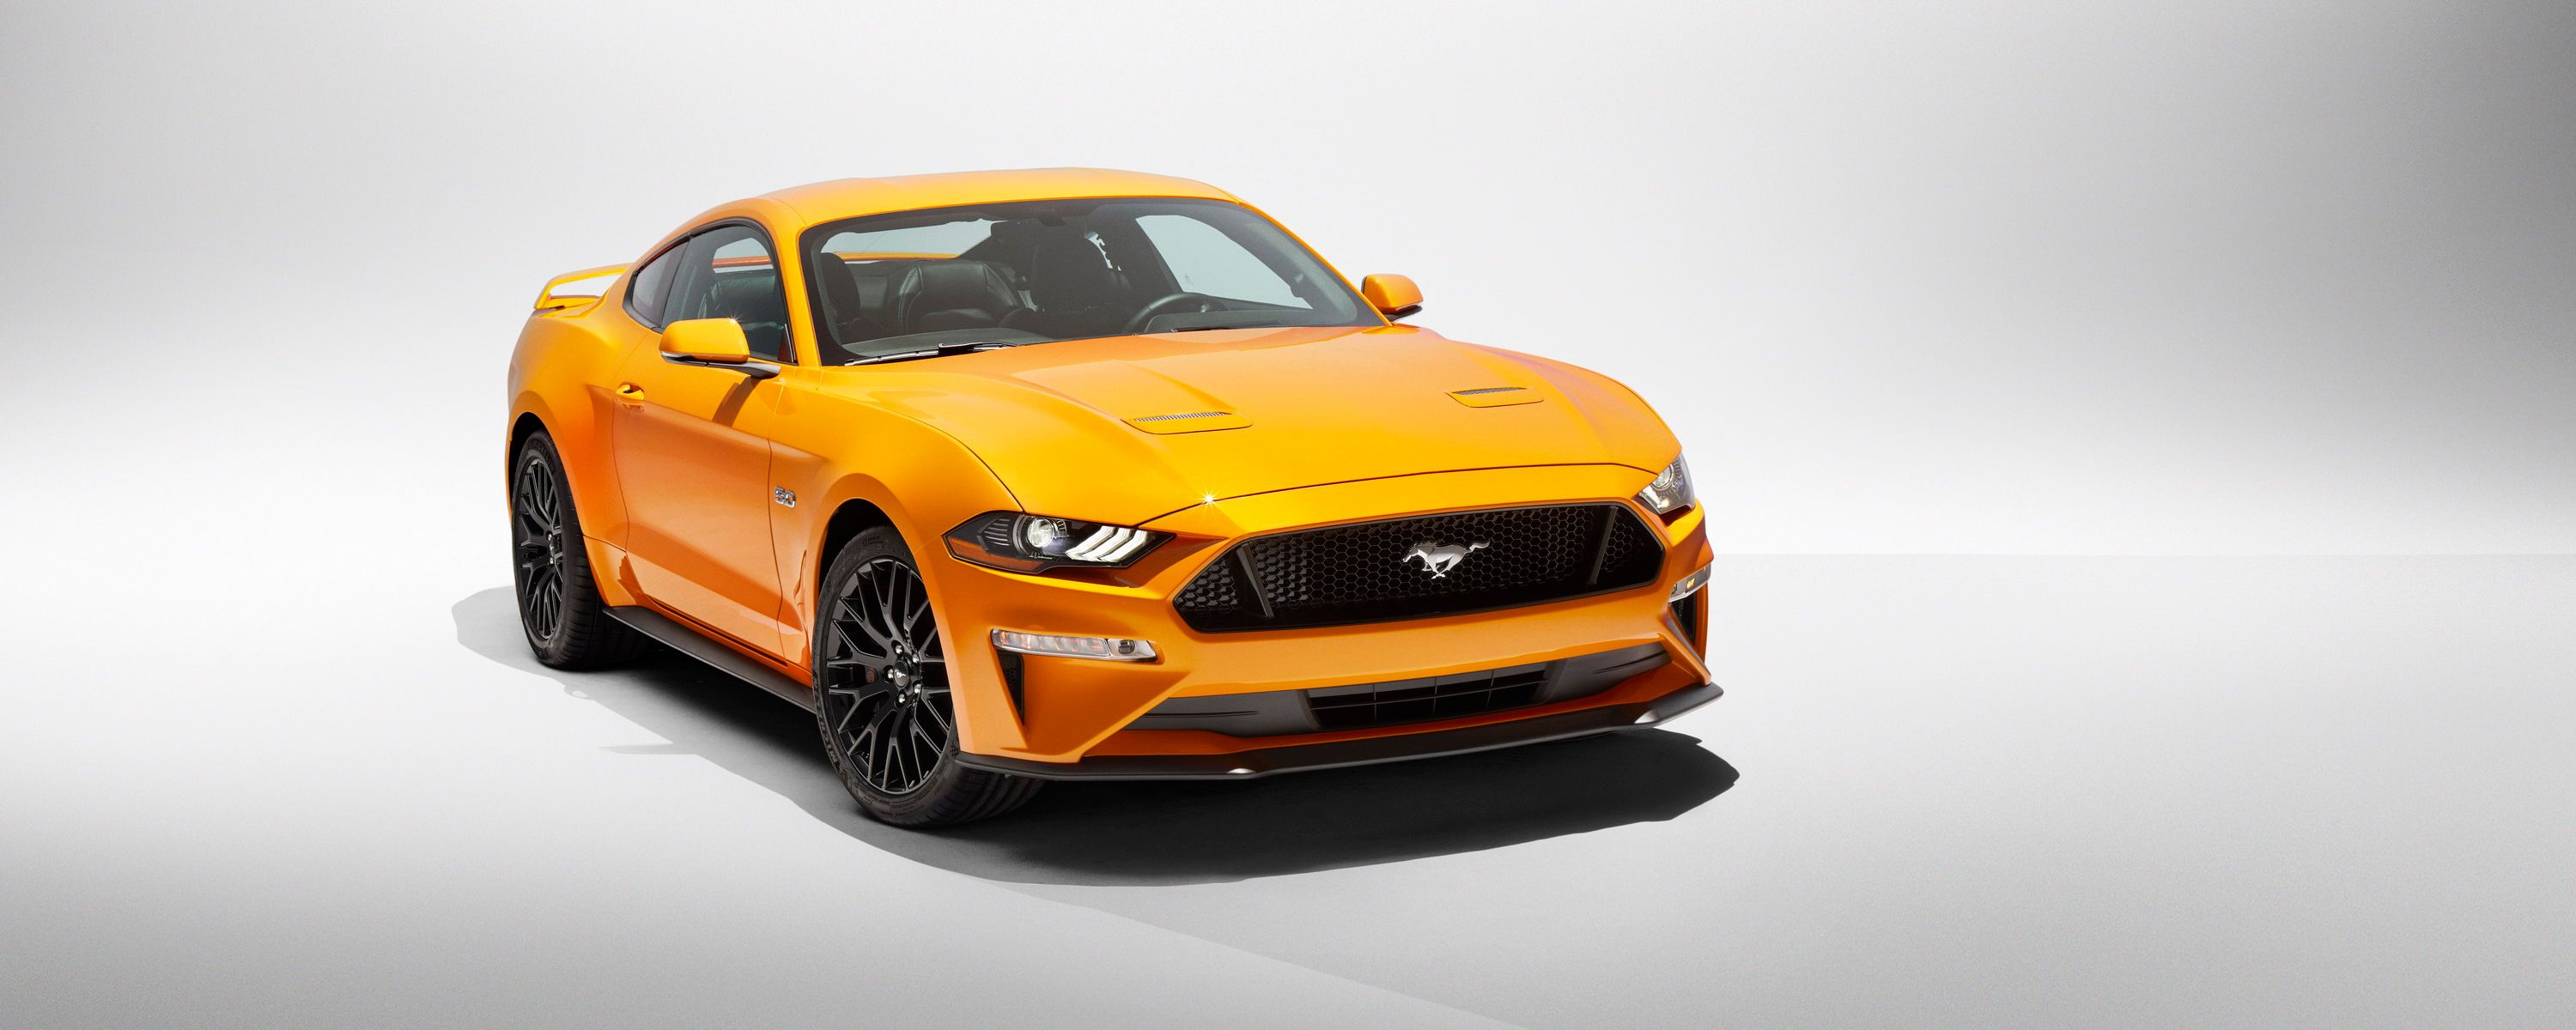 2018 The Wait Is Over! Here's the Upgraded, 2018 Ford Mustang